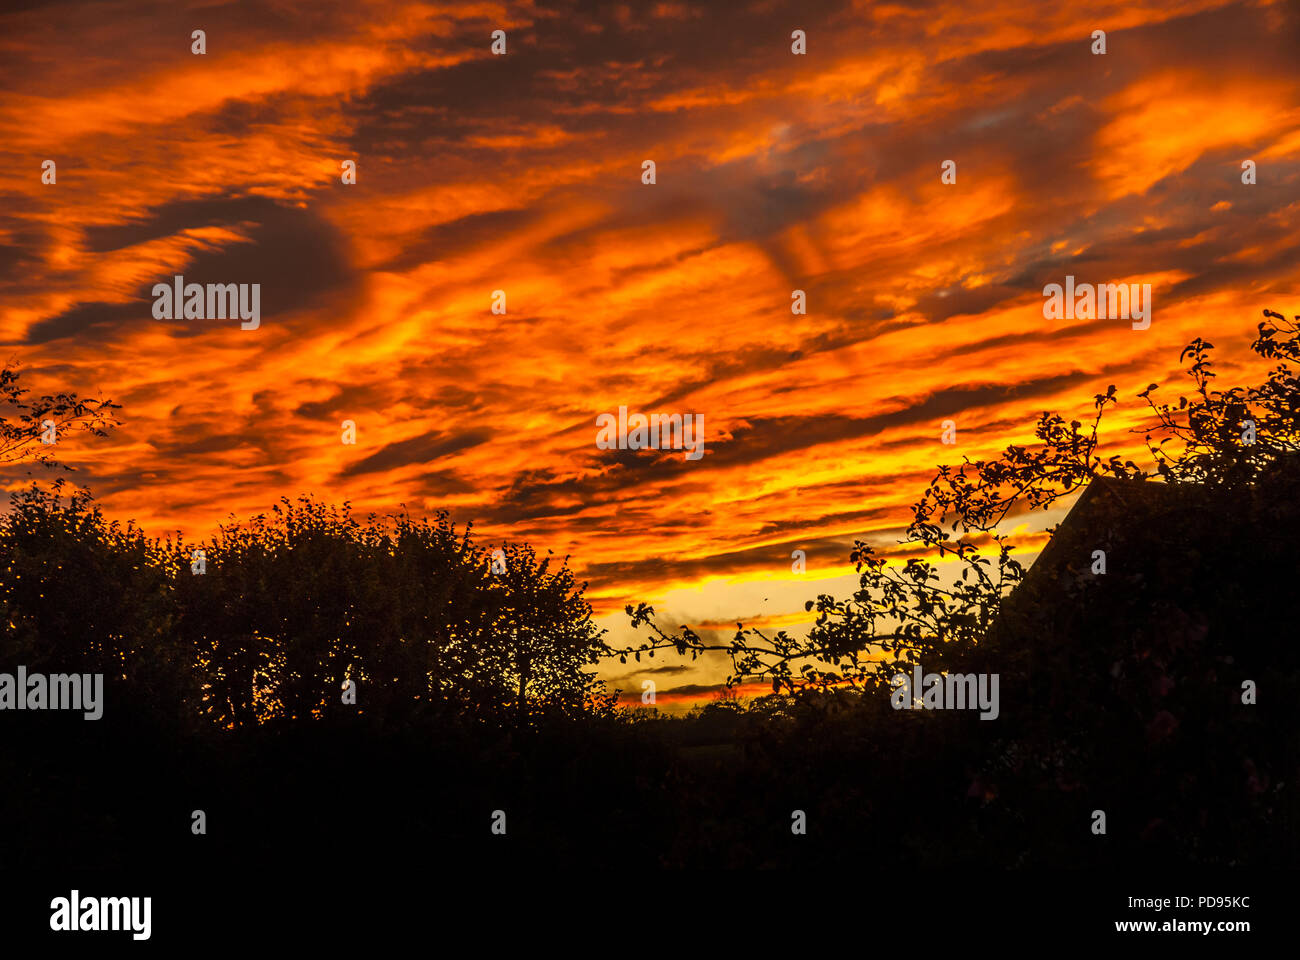 Being a country area with plenty of hills and clean air, the skys are often spectacular. Stock Photo